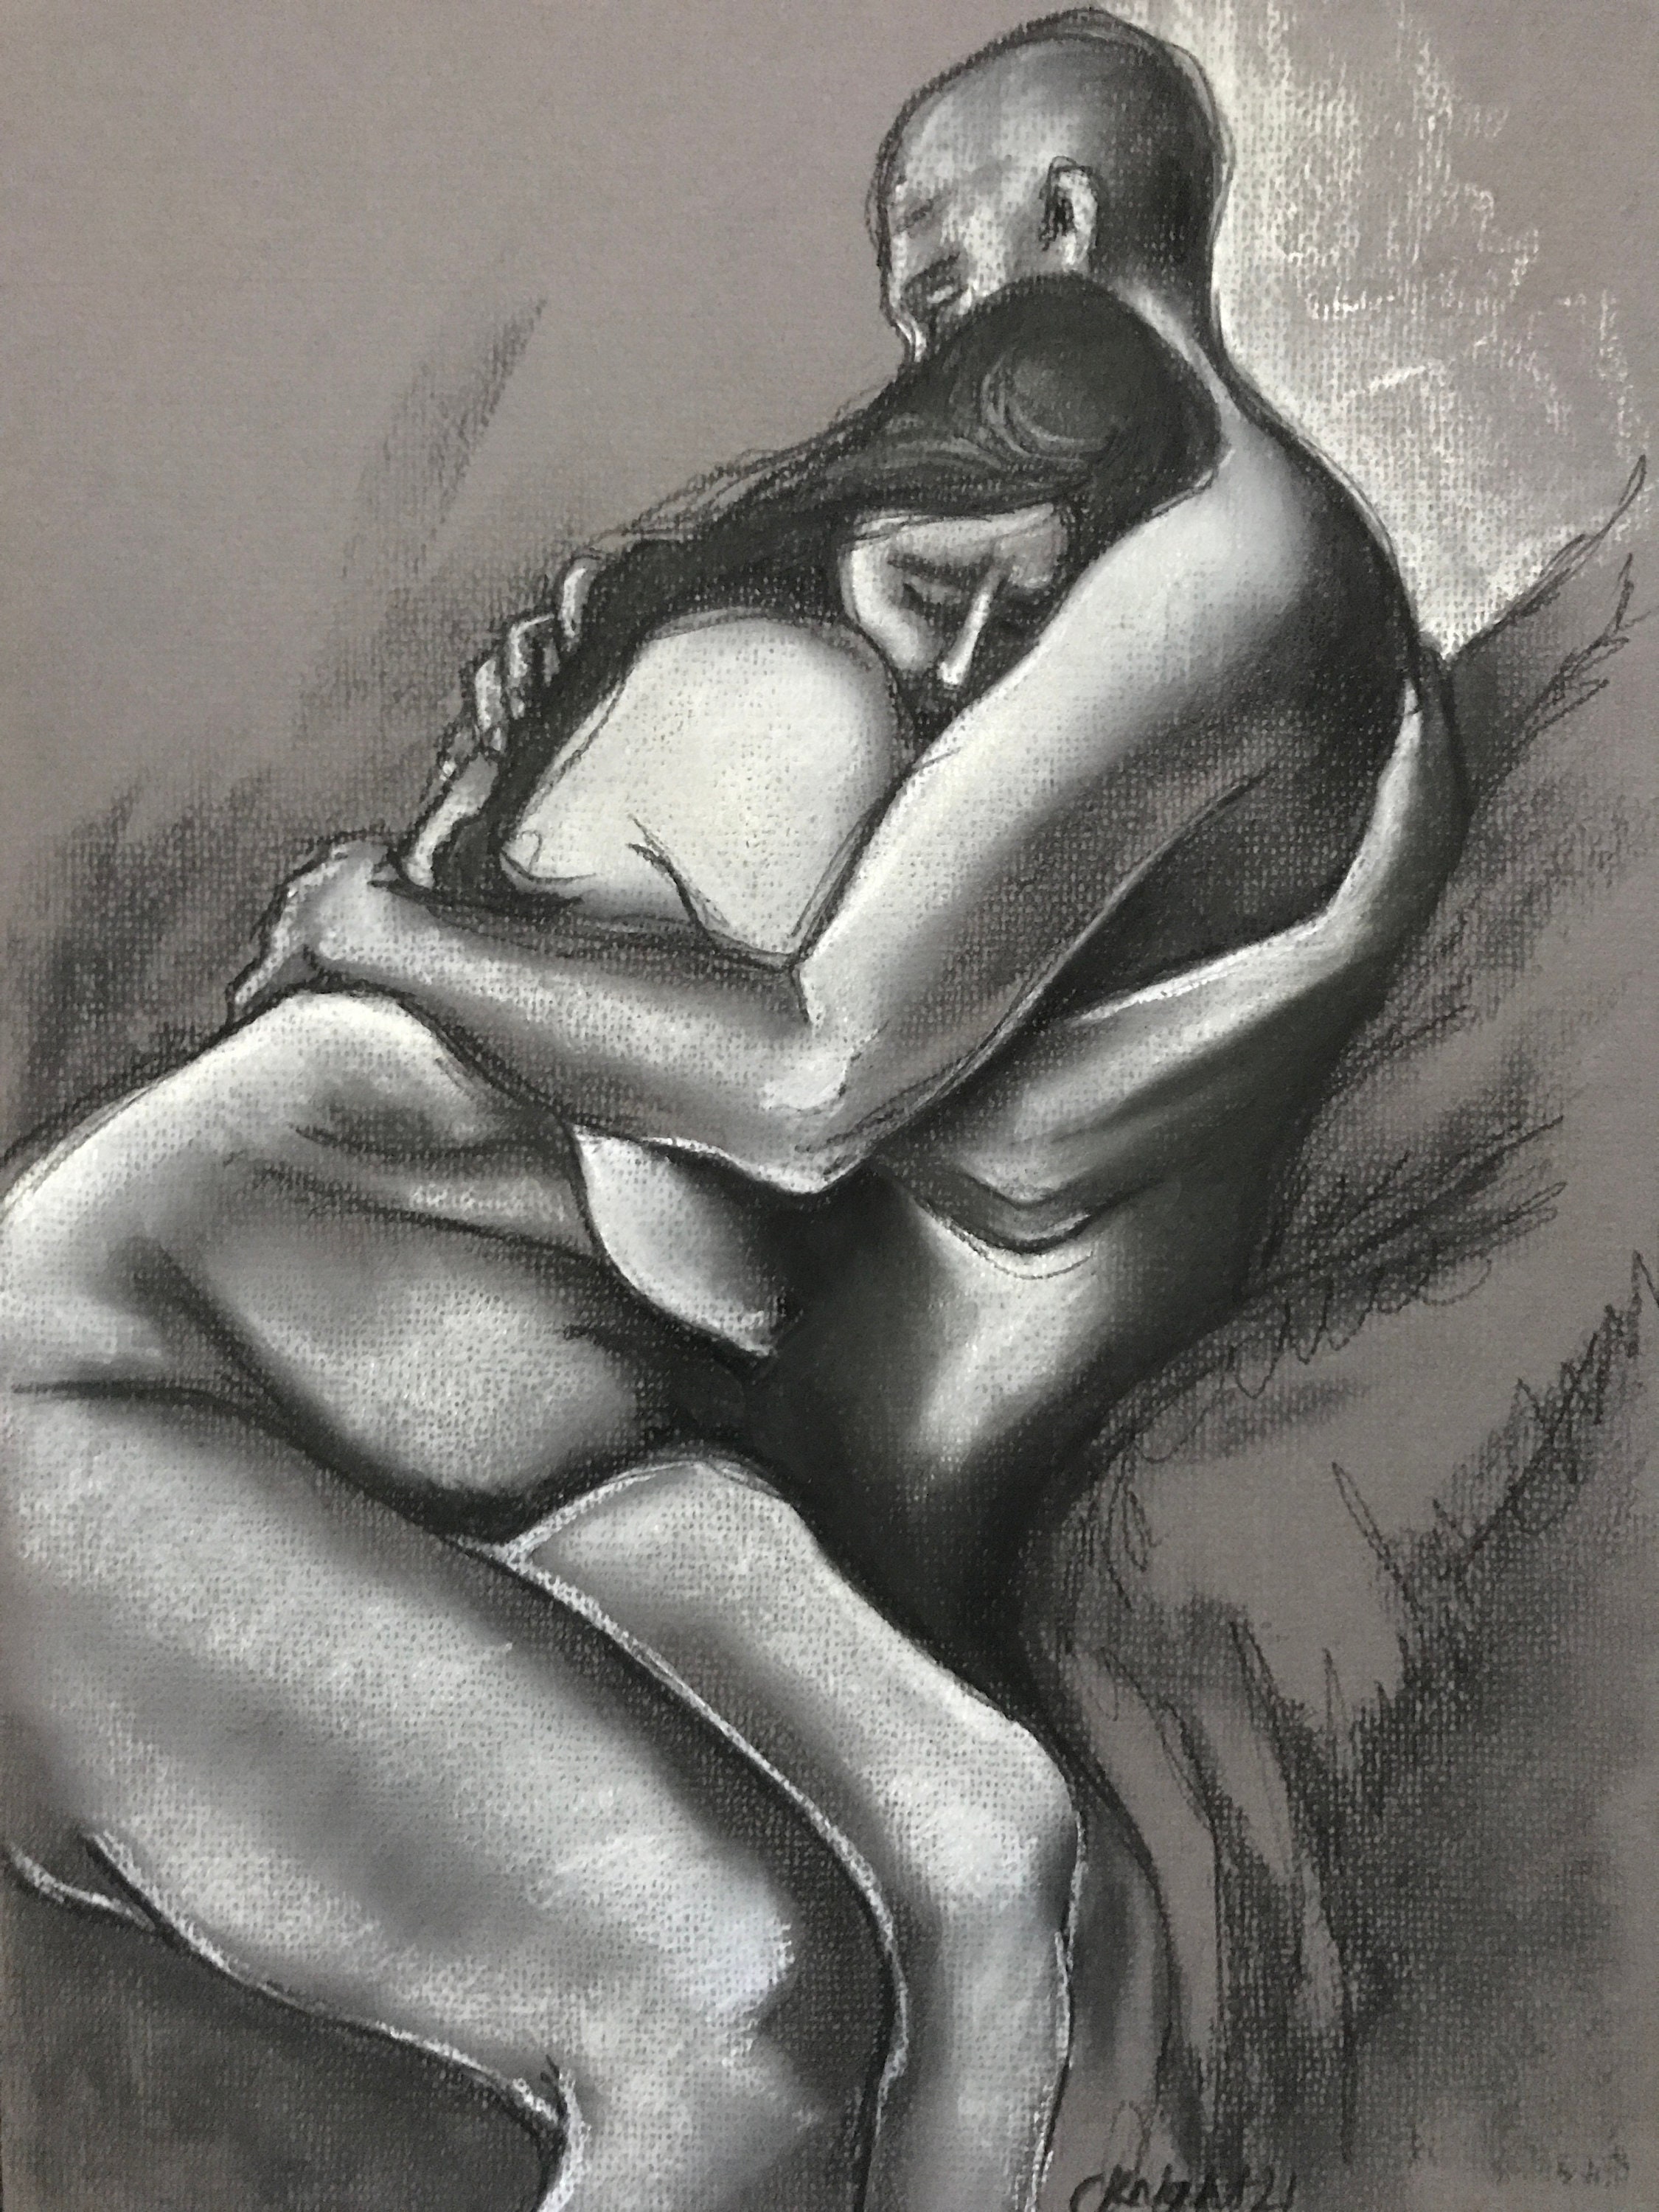 Seated Nude Couple Hugging Original Life Drawing 25 X 35 Cm 9 X 13 in  Charcoal and Pastel on Brownish Grey Pastel Paper - Etsy Sweden